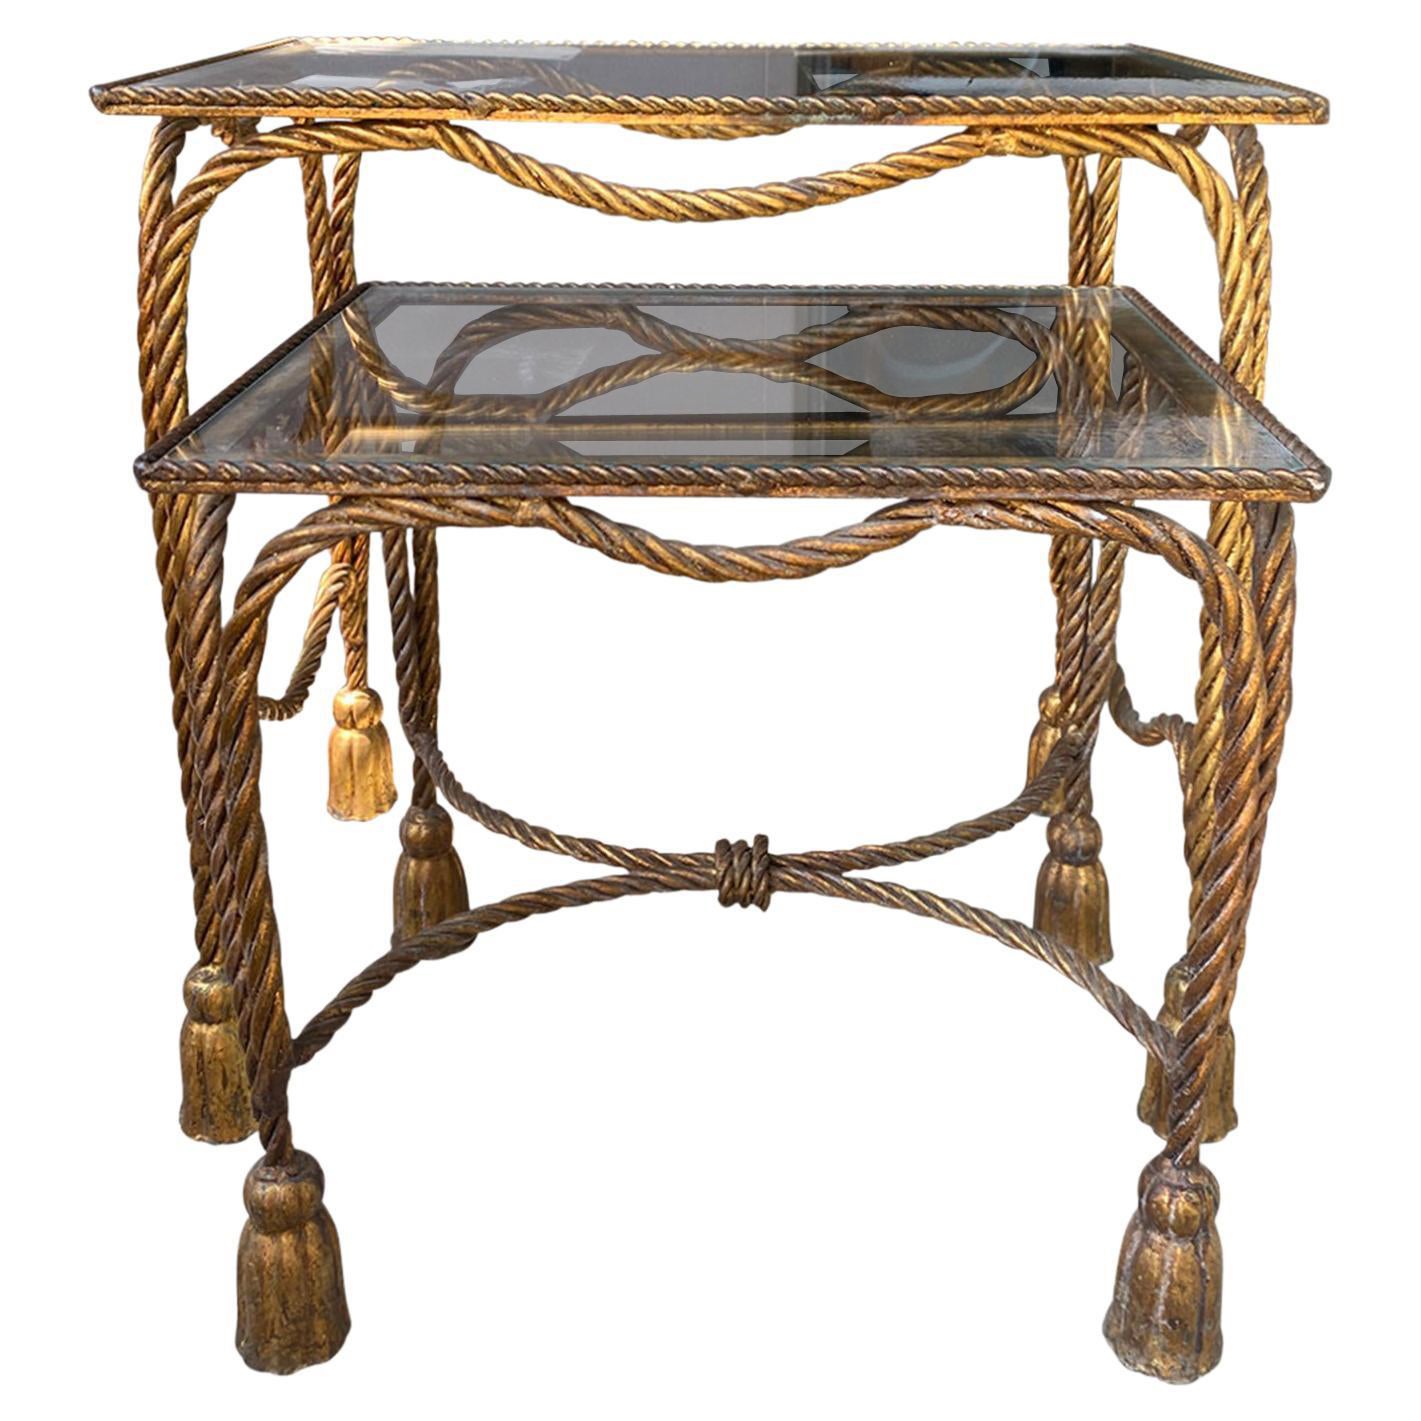 Mid-20th Century Italian Nesting Tables with Rope and Tassel Detail For Sale